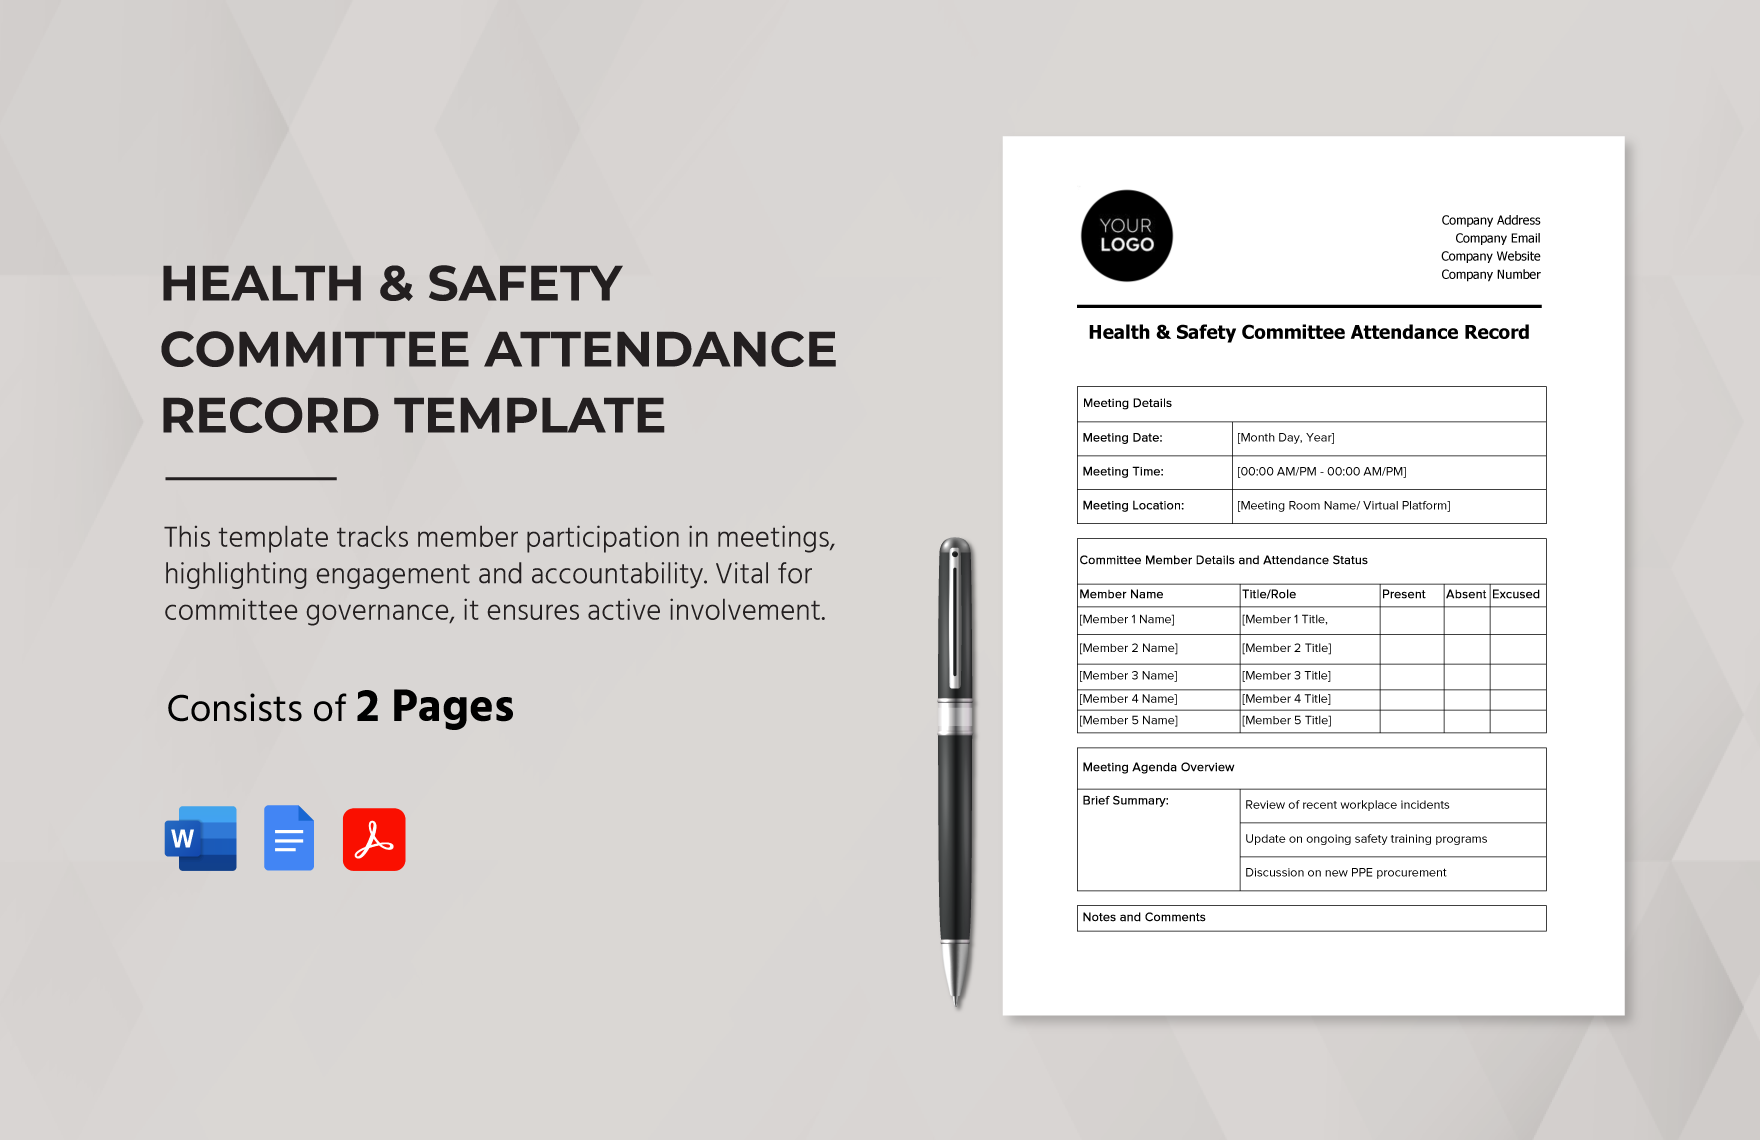 Health & Safety Committee Attendance Record Template